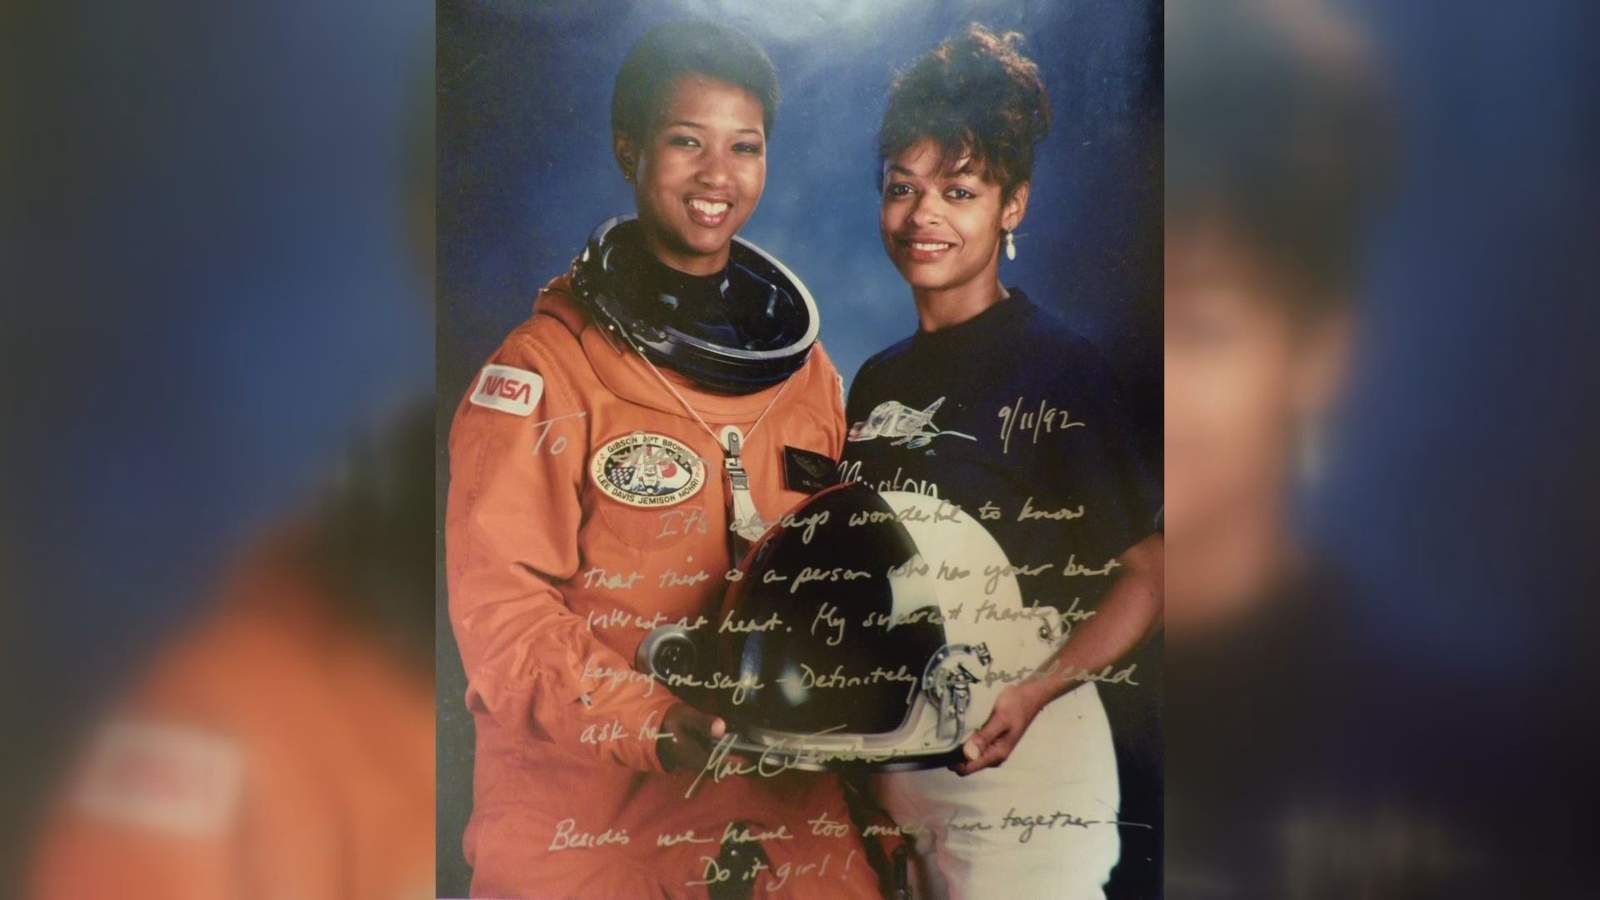 Local ‘Hidden Figure’ shares story of her history-making aerospace career